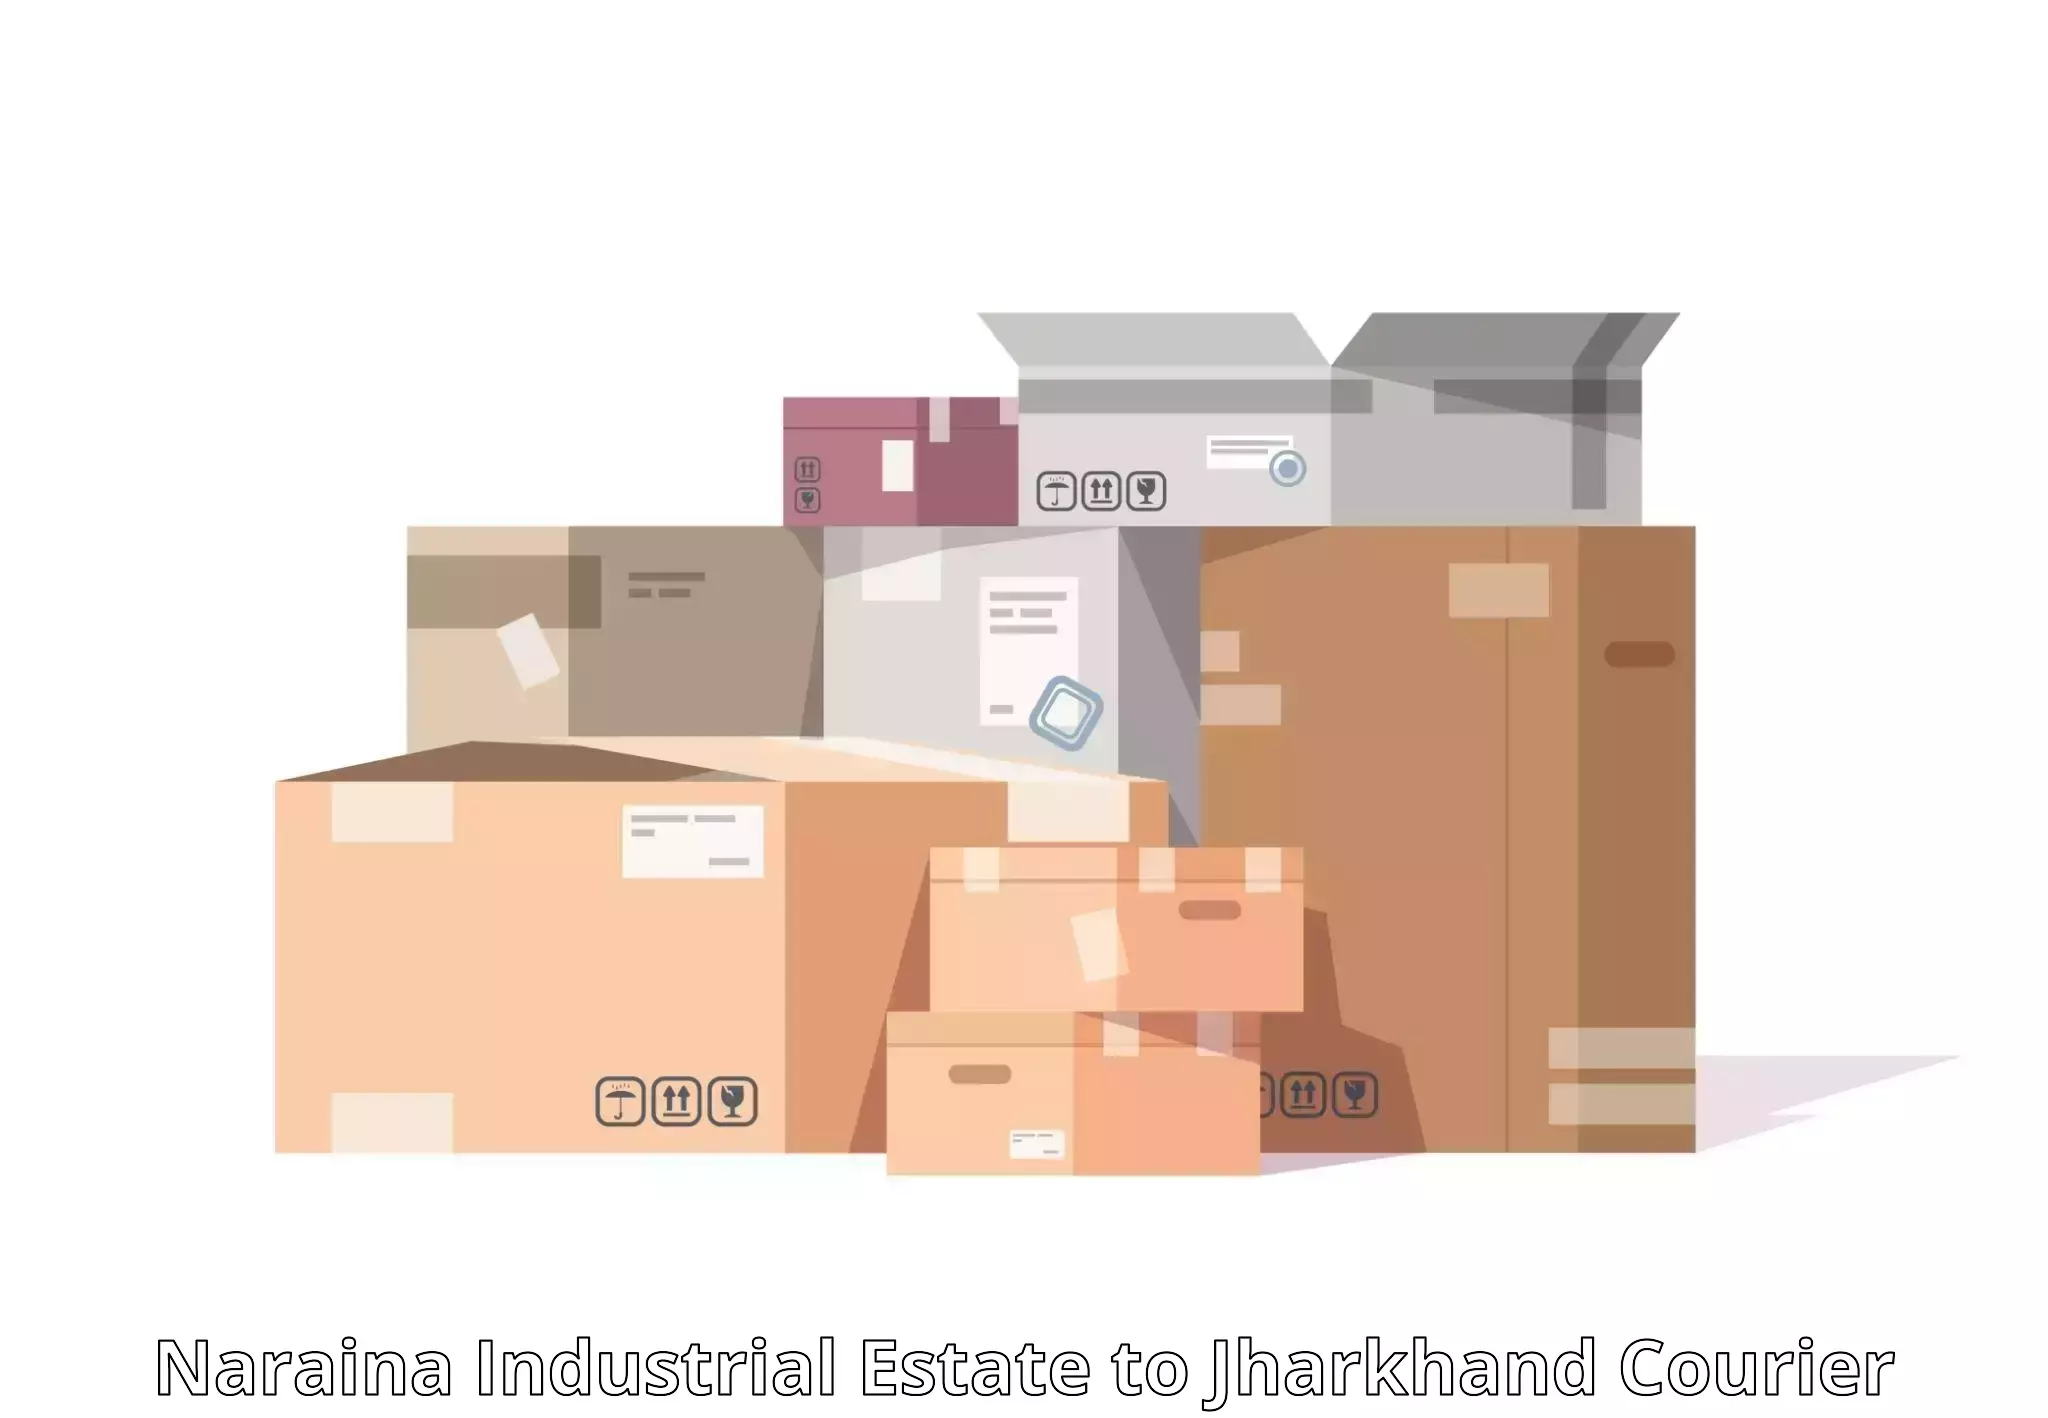 State-of-the-art courier technology Naraina Industrial Estate to Jamshedpur